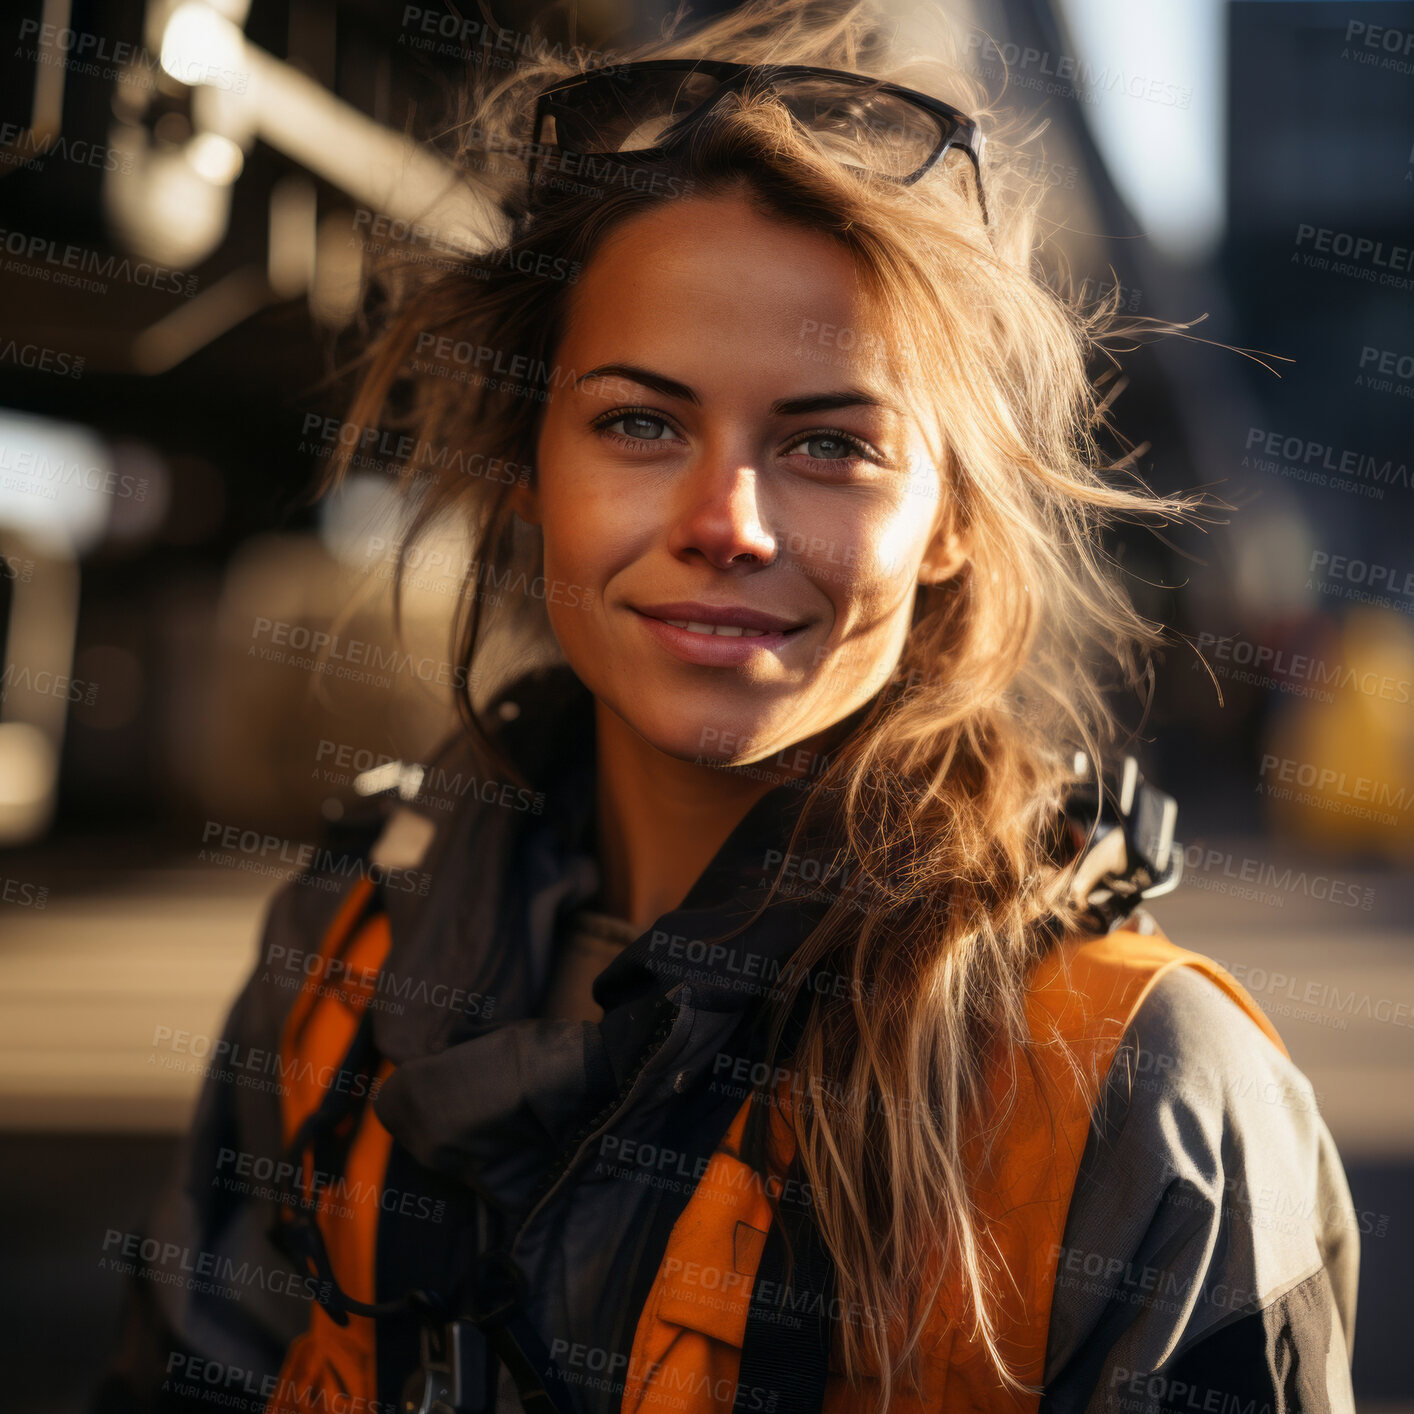 Buy stock photo Portrait of woman construction worker. Professional engineer or artisan. Female empowerment.